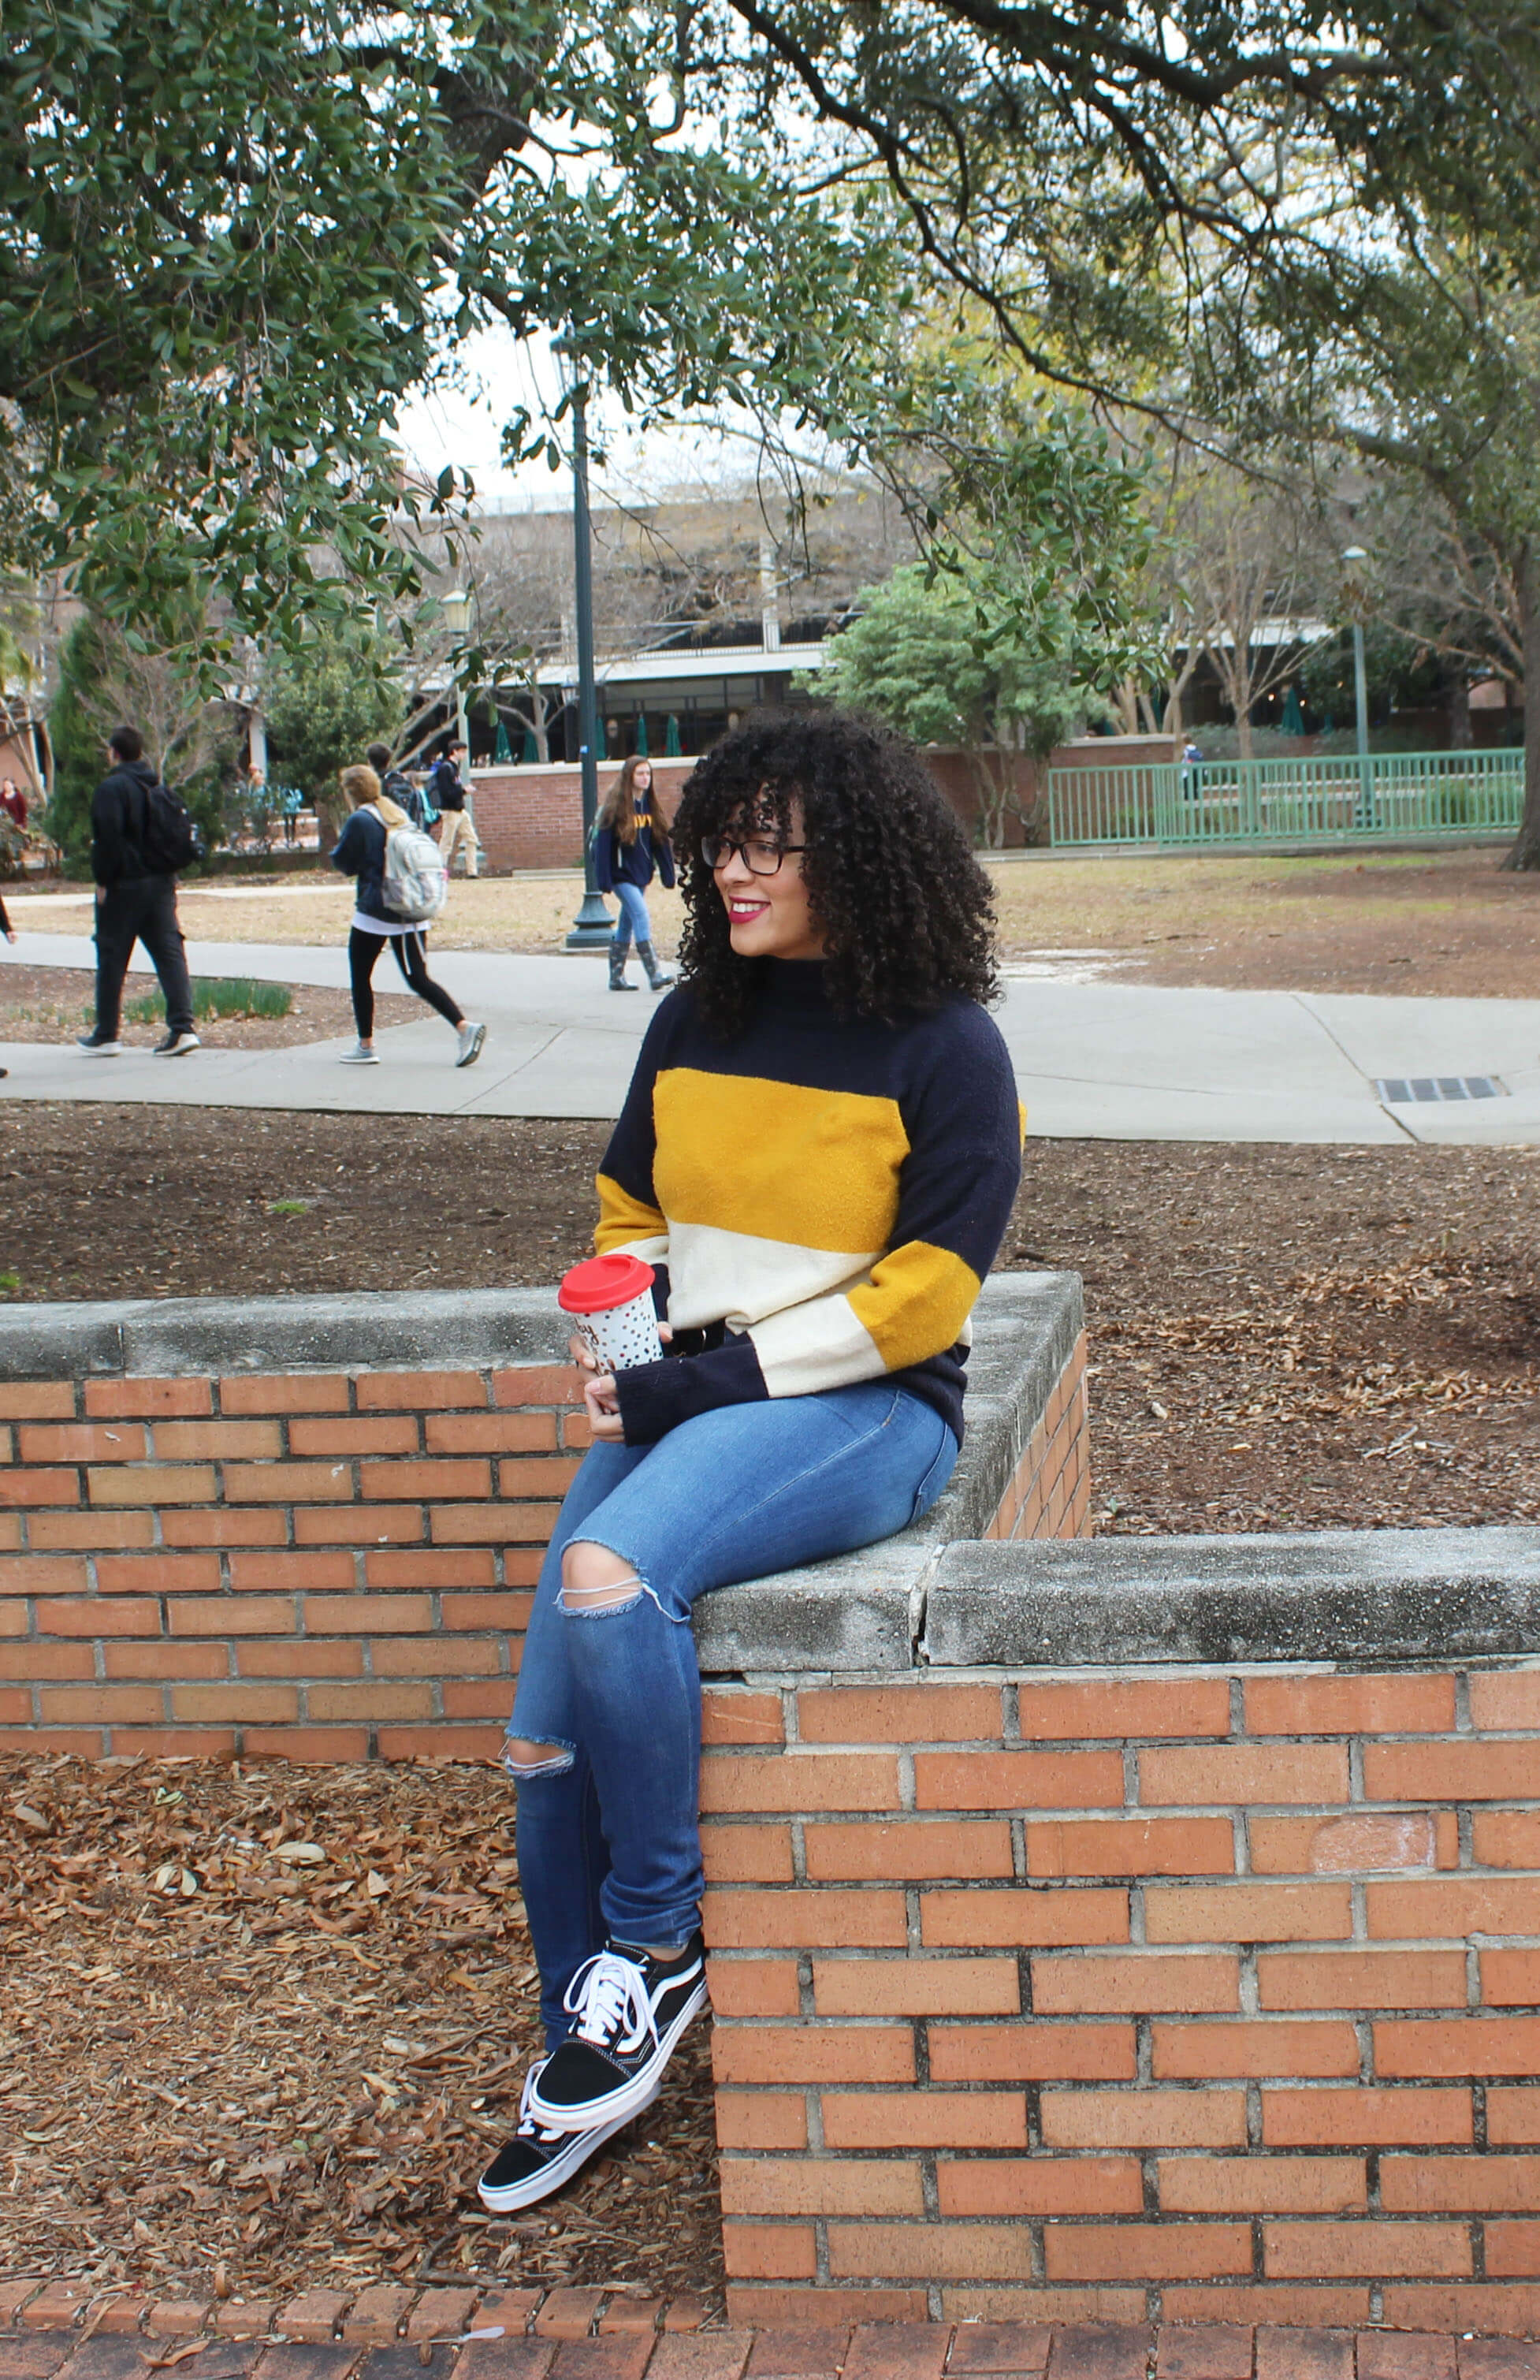 Striped Sweaters are my favorite type of sweaters because they are interesting without being boring. This one is perfect for the fall and winter months with it's muted colors.